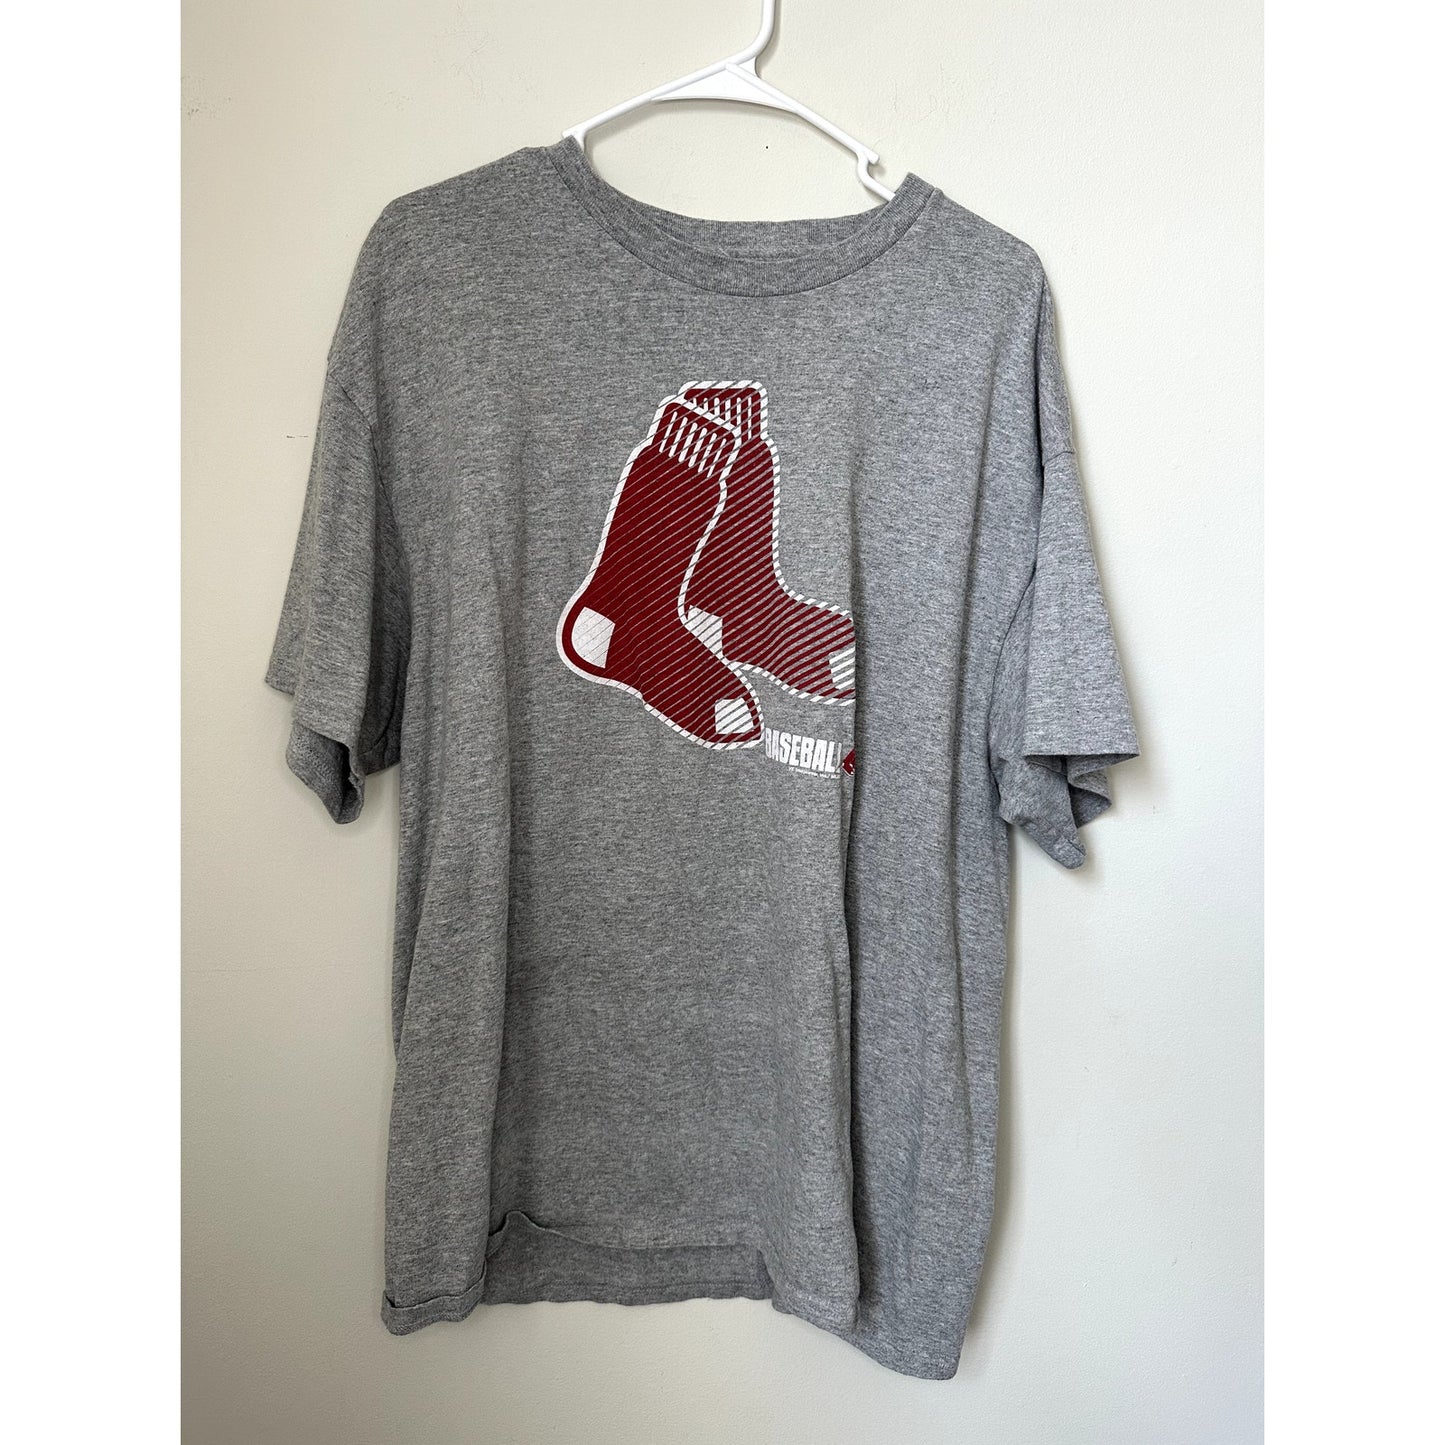 Boston Red Sox Graphic T-shirt, Size XL